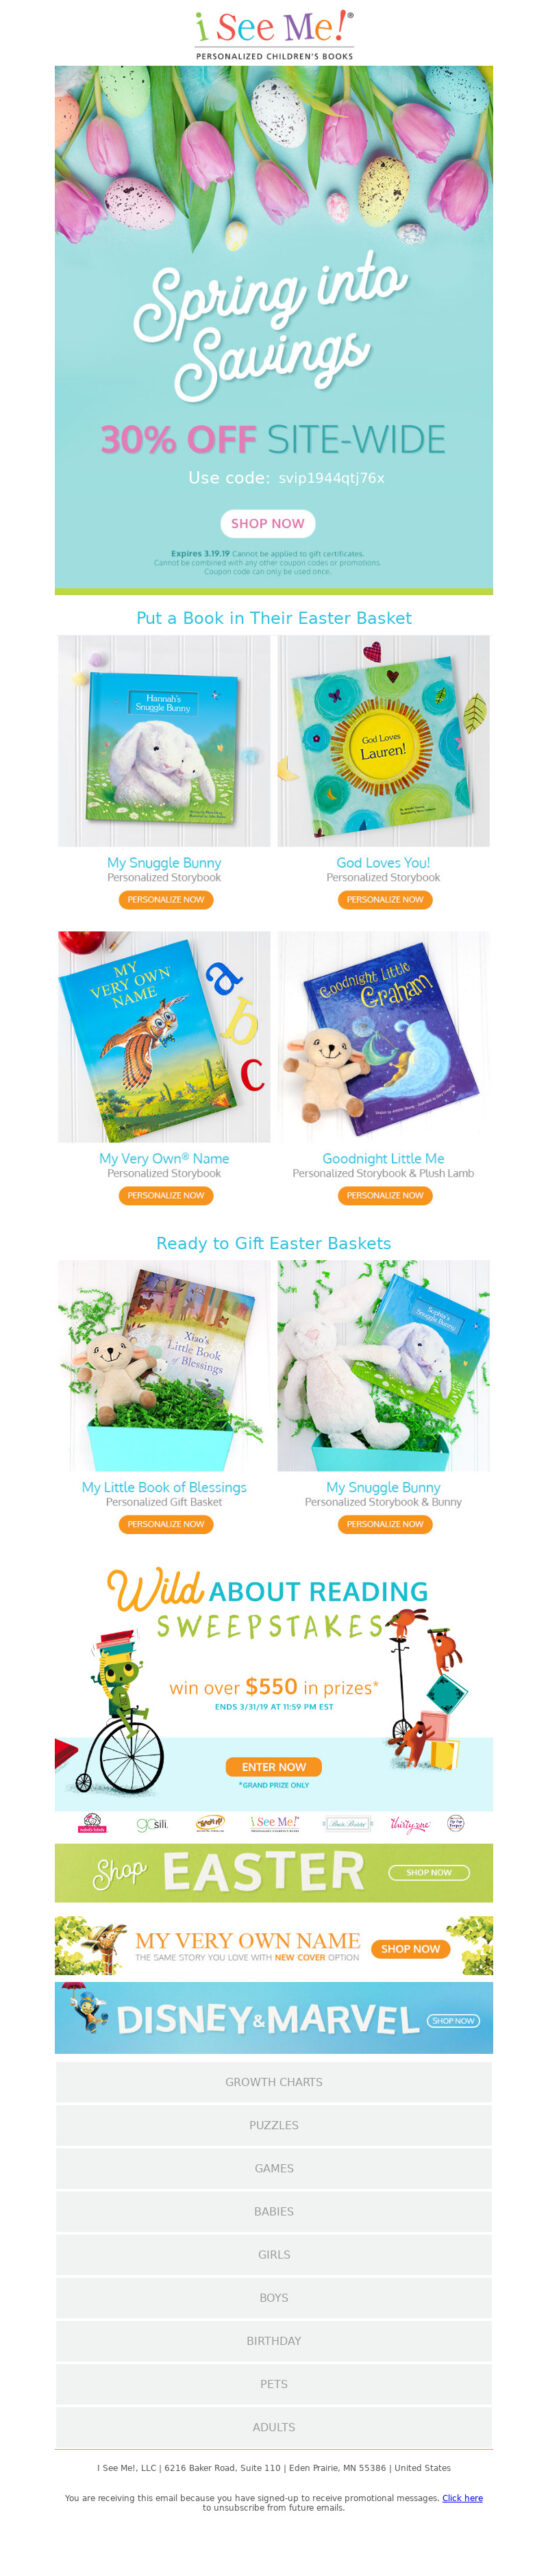 I See Me's Easter marketing campaign features a 30% off sitewide discount promotion and a curated selection of personalized Easter-themed books.